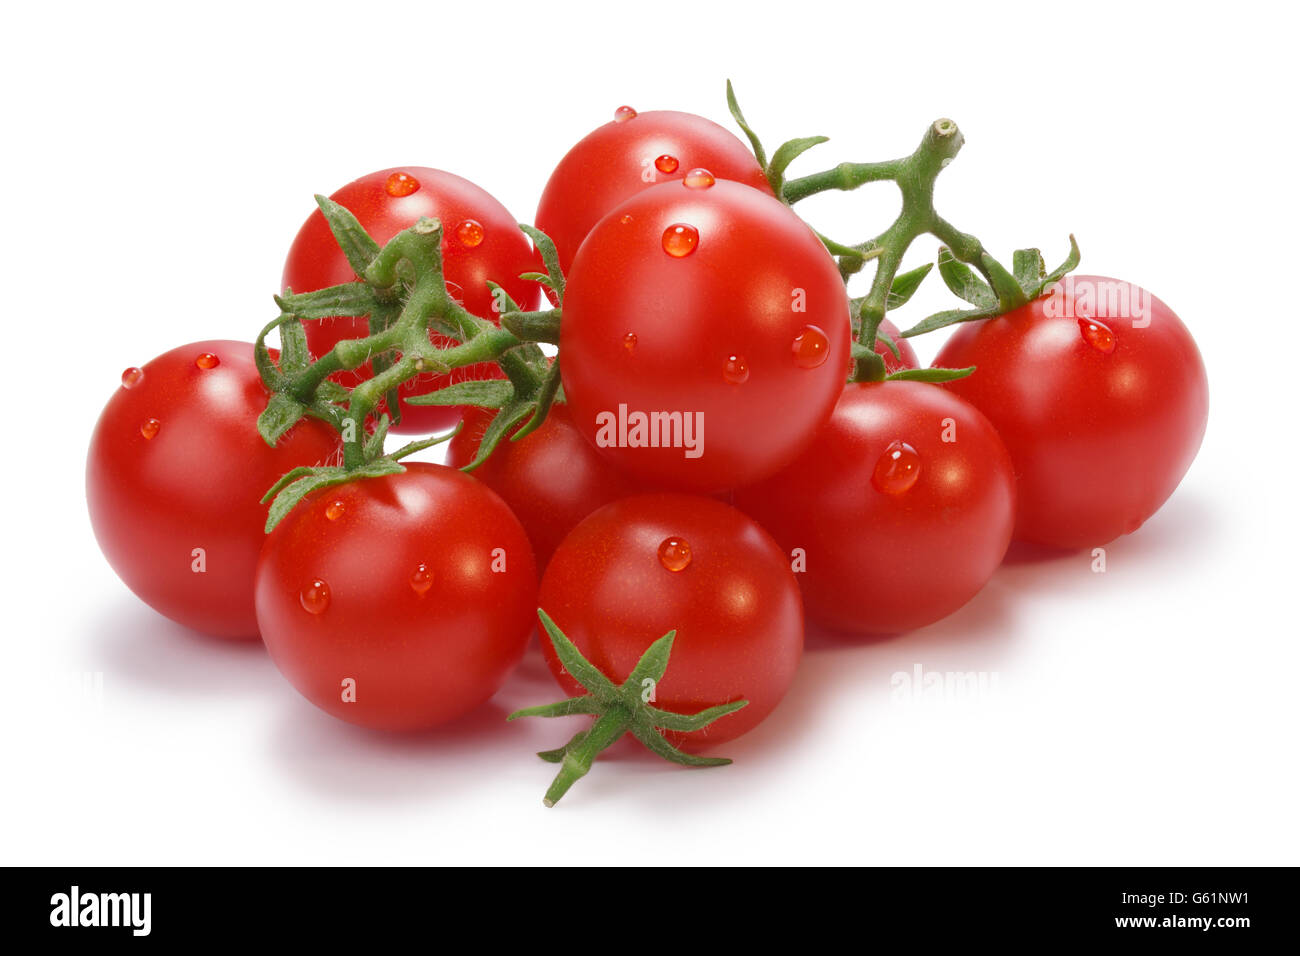 Ripe heirloom Cherry Tomatoes on vine (Solanum lycopersicum). Clipping paths for both tomatoes and shadow,infinite depth of fiel Stock Photo